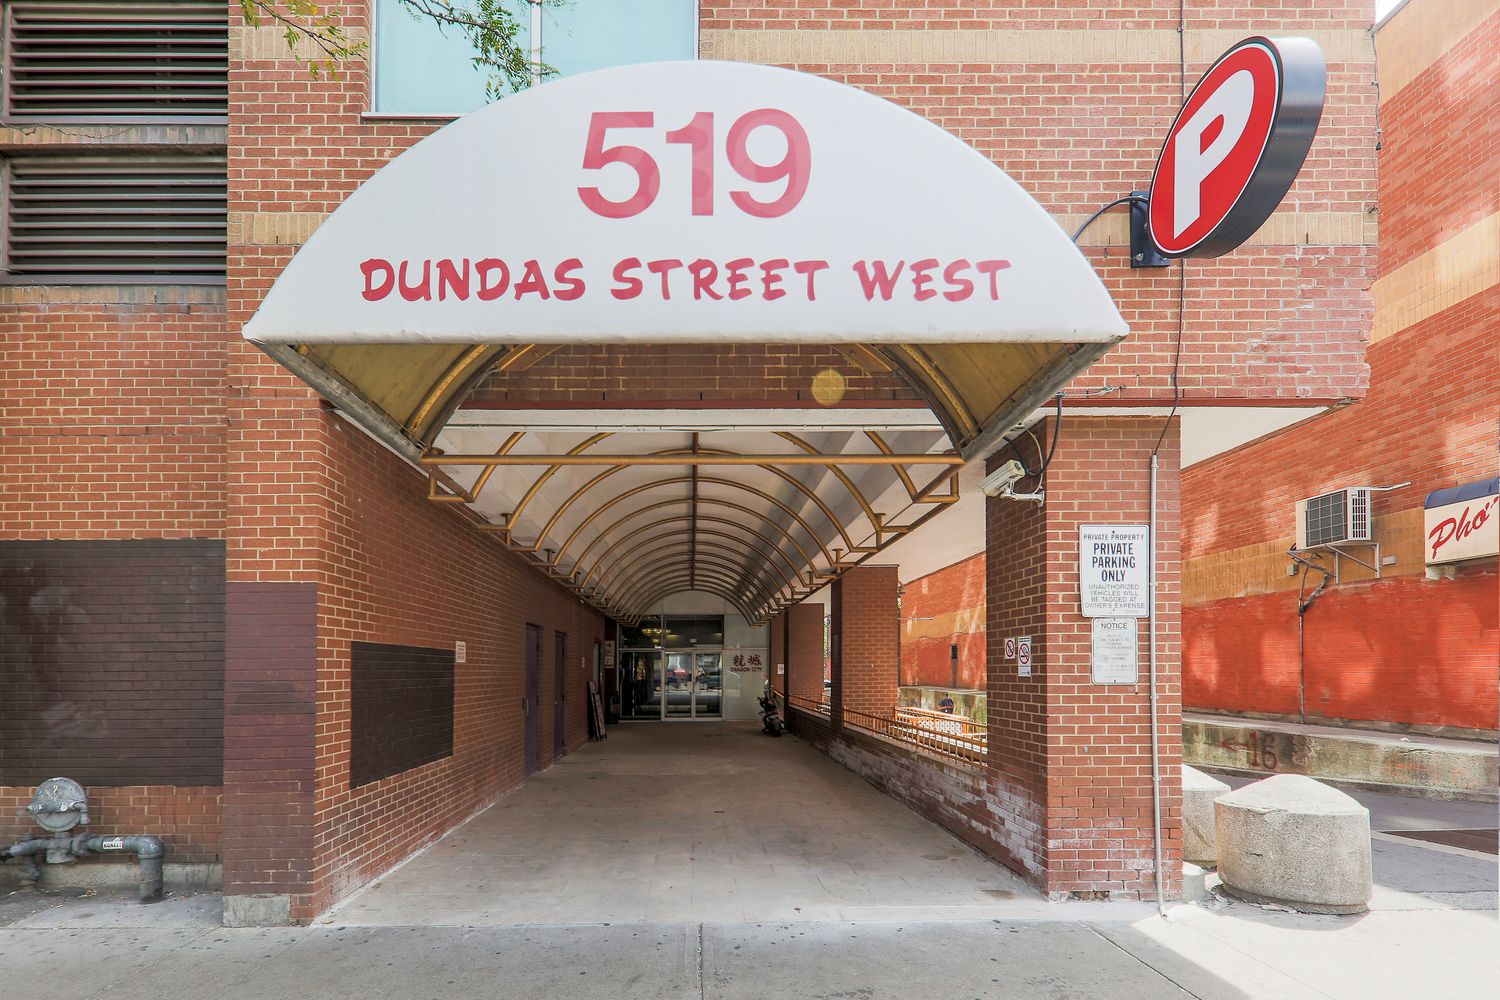 519 Dundas Street W. 519 Dundas is located in  Downtown, Toronto - image #3 of 4